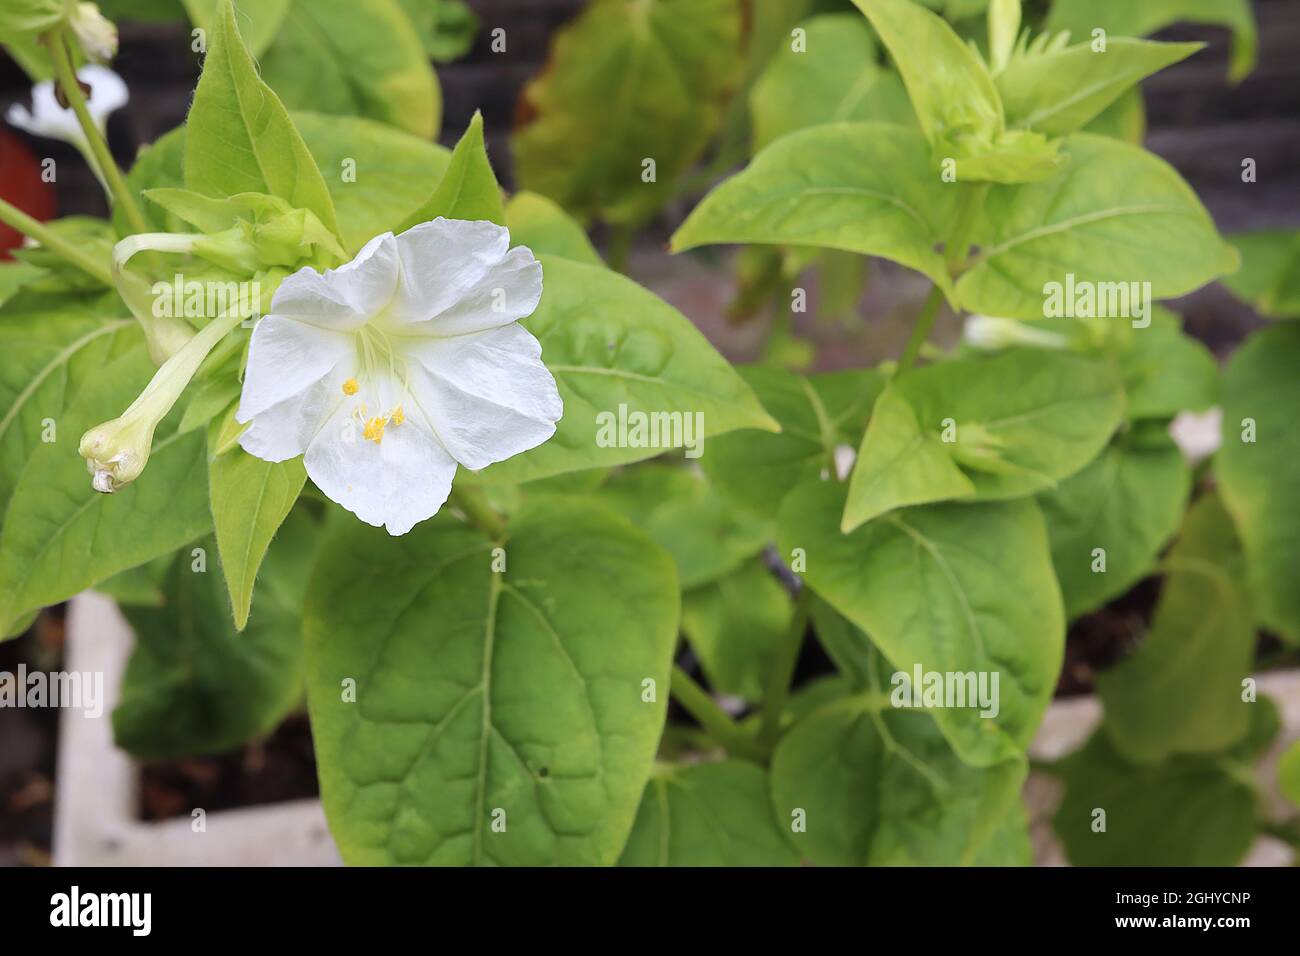 Mirabilis jalapa ‘Alba’ Marvel of Peru – strongly scented funnel-shaped white flowers with ruffled petals, August, England, UK Stock Photo